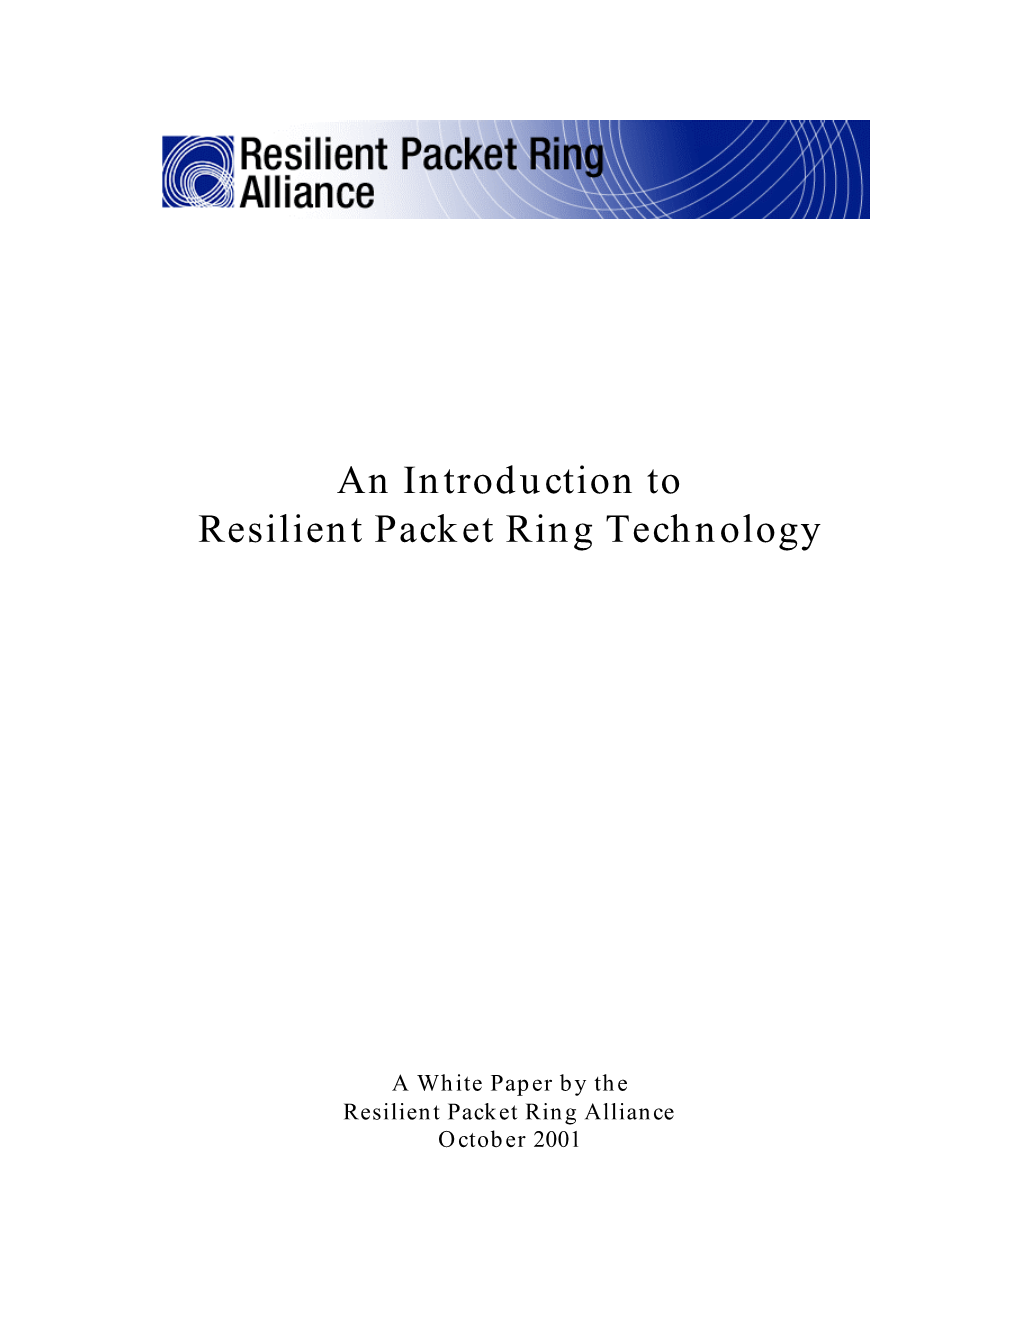 Resilient Packet Ring White Paper